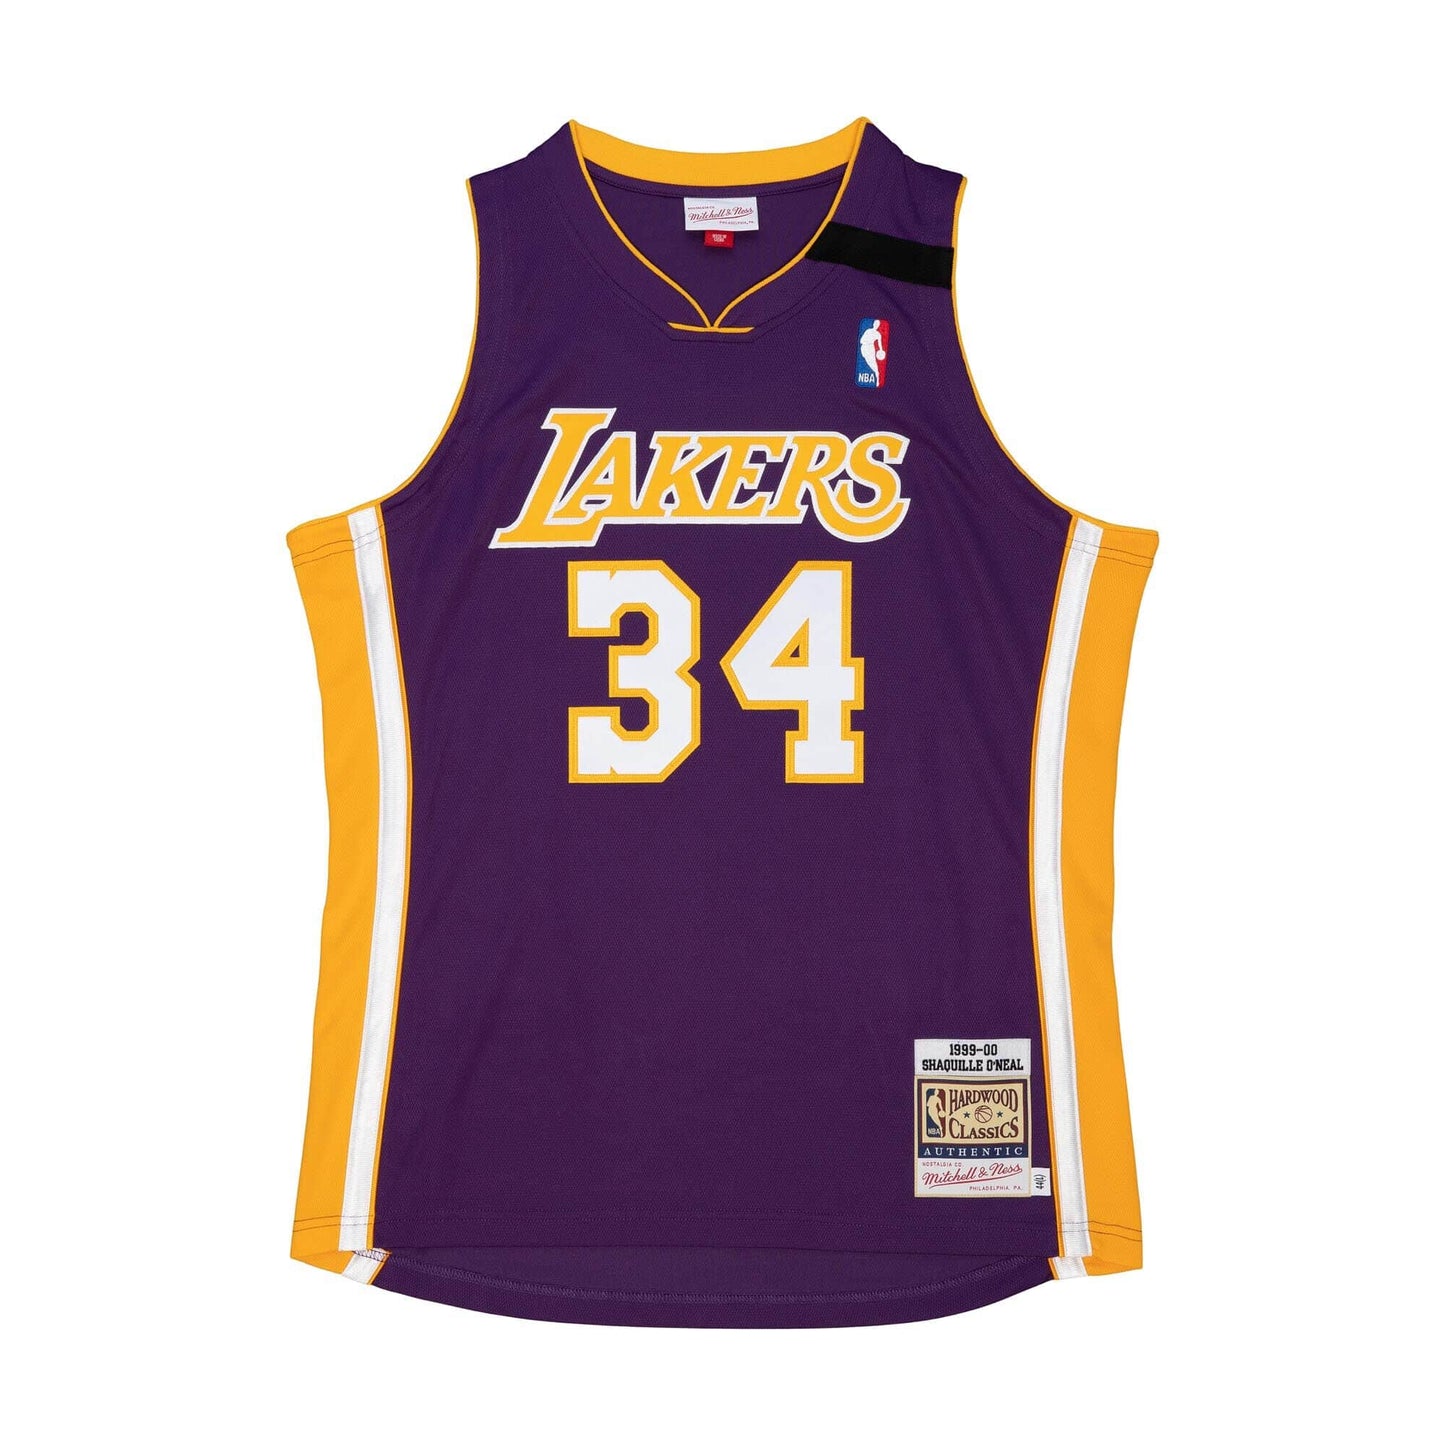 Authentic Shaquille O'Neal Los Angeles Lakers 1999-00 Jersey